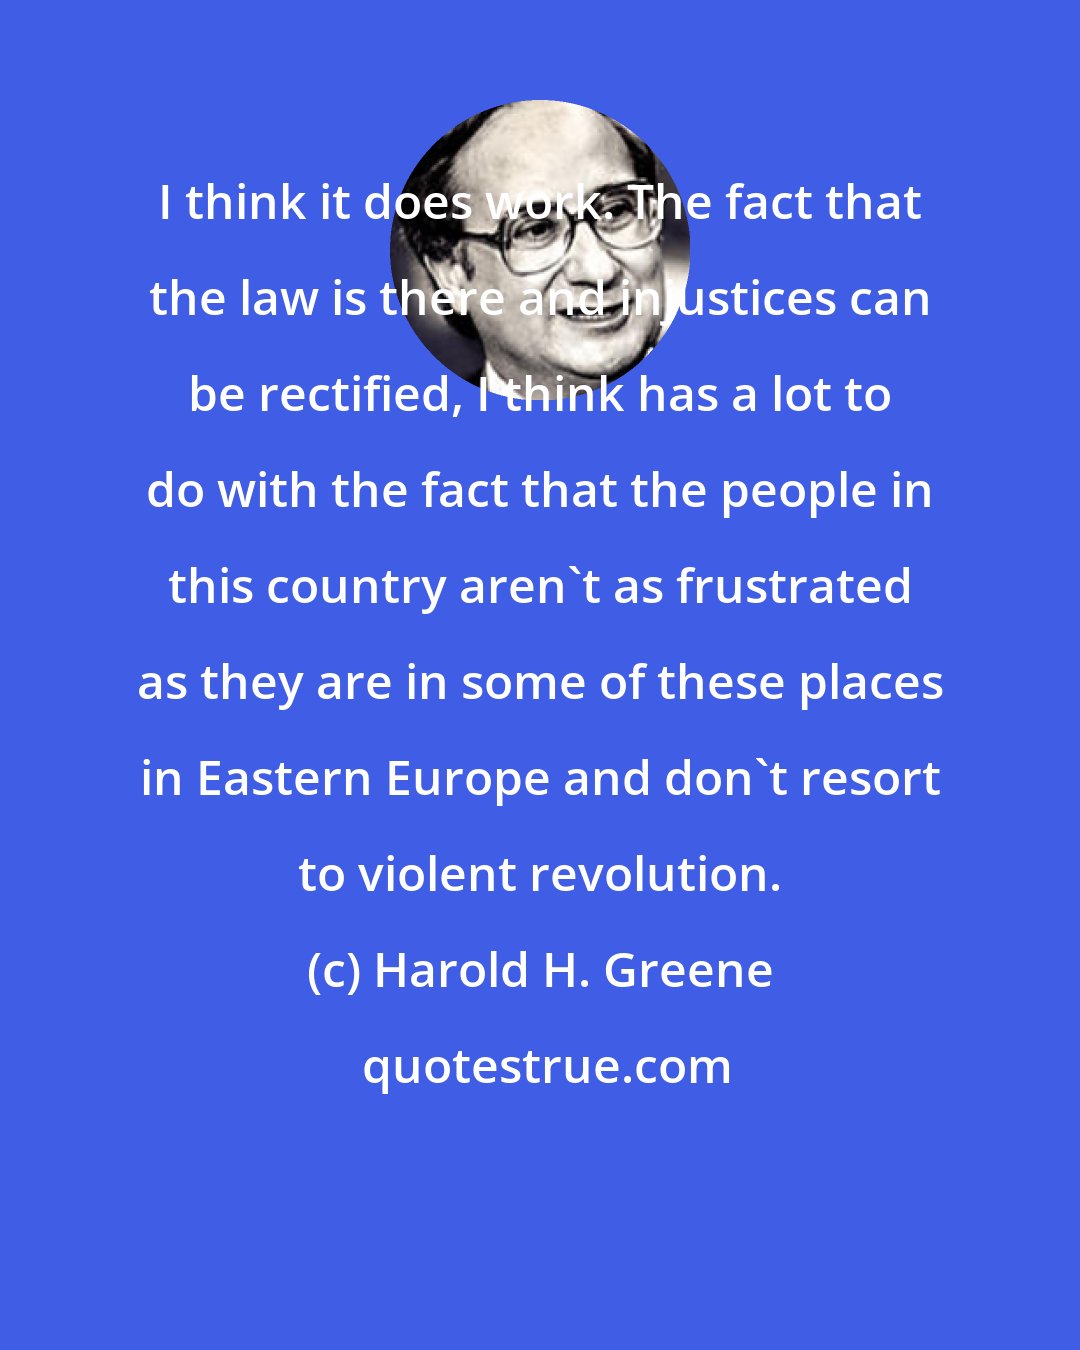 Harold H. Greene: I think it does work. The fact that the law is there and injustices can be rectified, I think has a lot to do with the fact that the people in this country aren't as frustrated as they are in some of these places in Eastern Europe and don't resort to violent revolution.